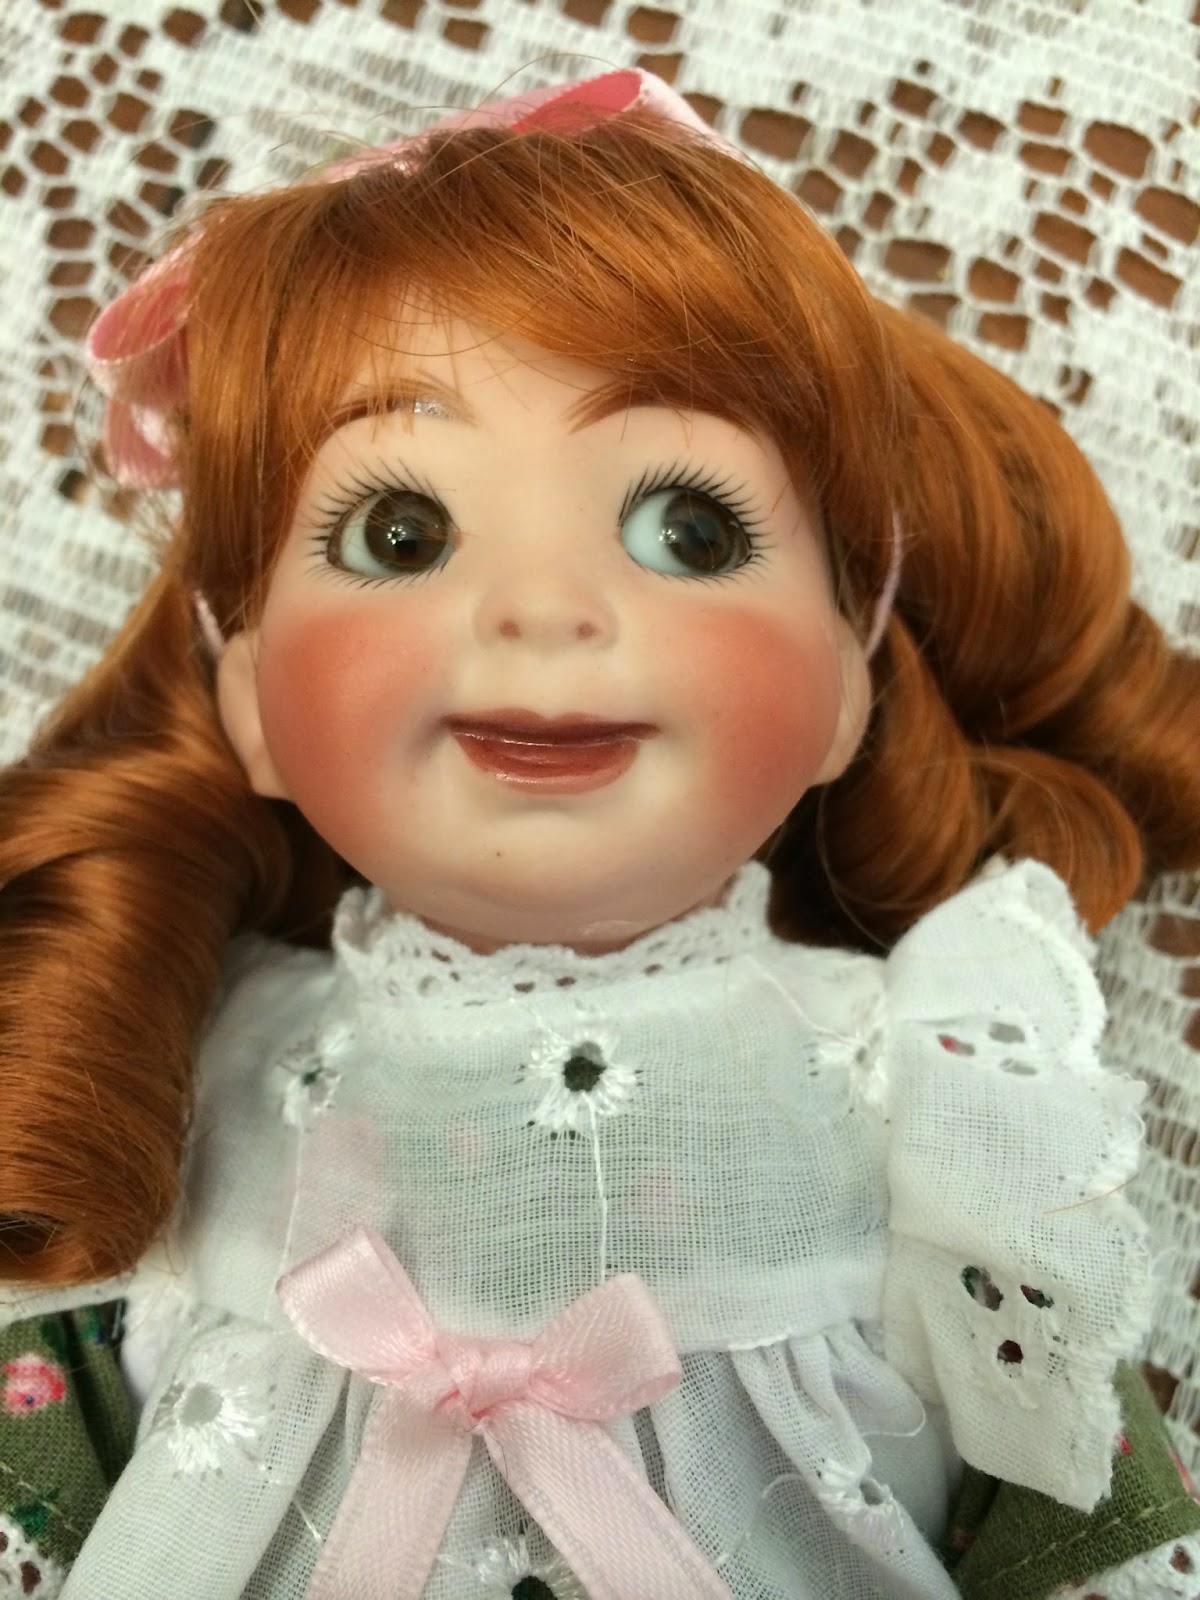 Once Upon A Doll Collection : Another Doll Show, More Fun Finds